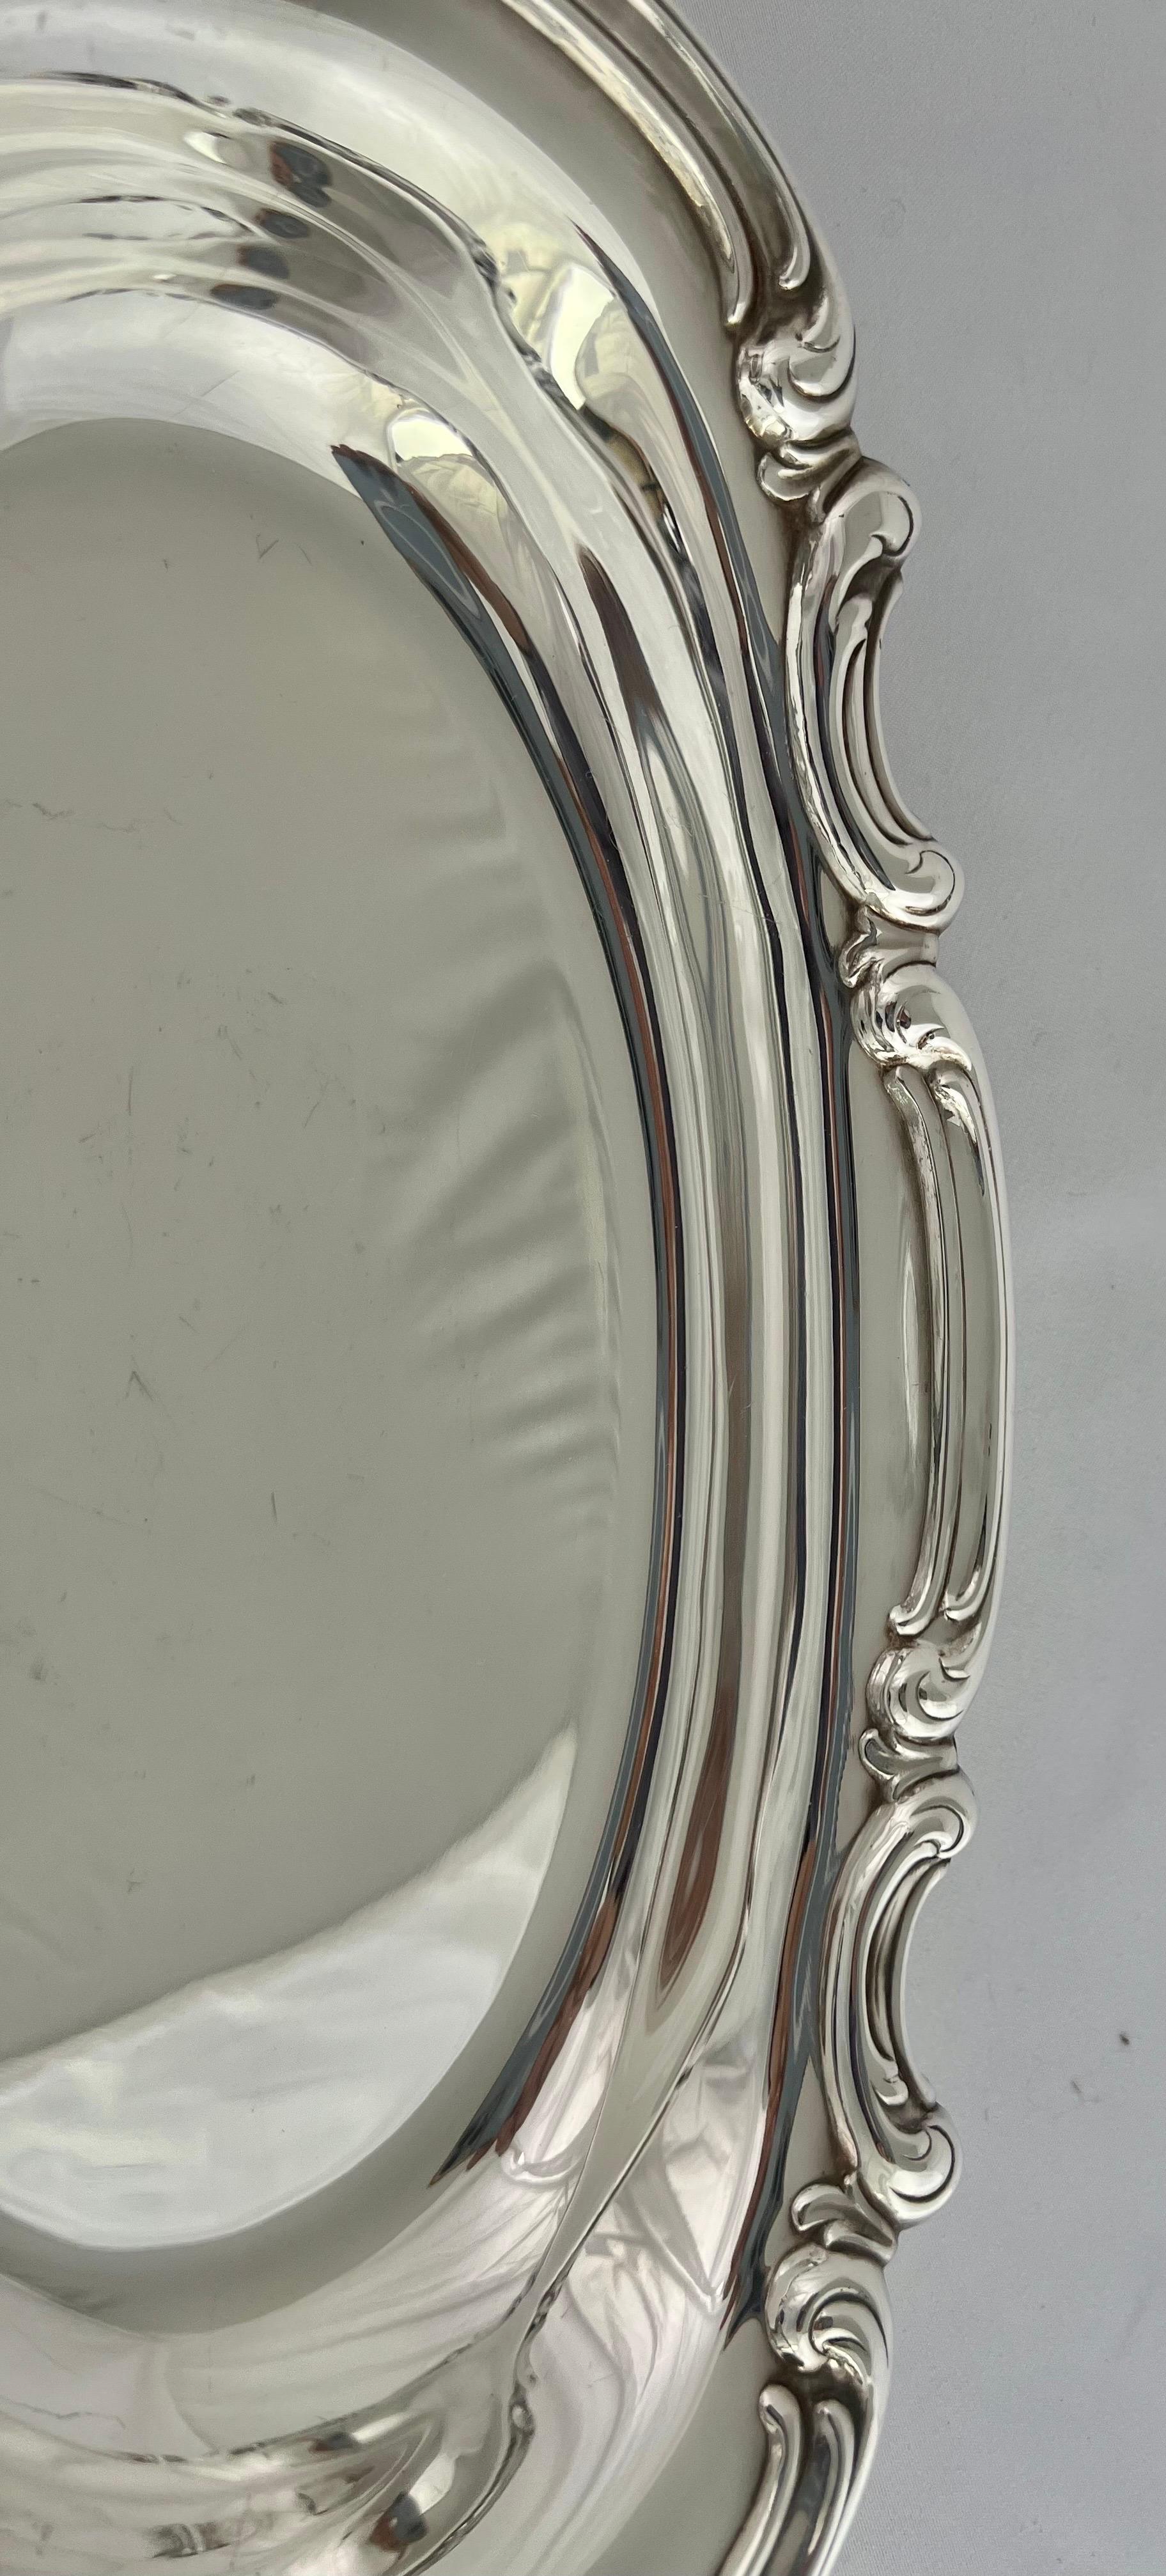 Pour Le Bain-American Gorham Silver Dish In Good Condition For Sale In Los Angeles, CA